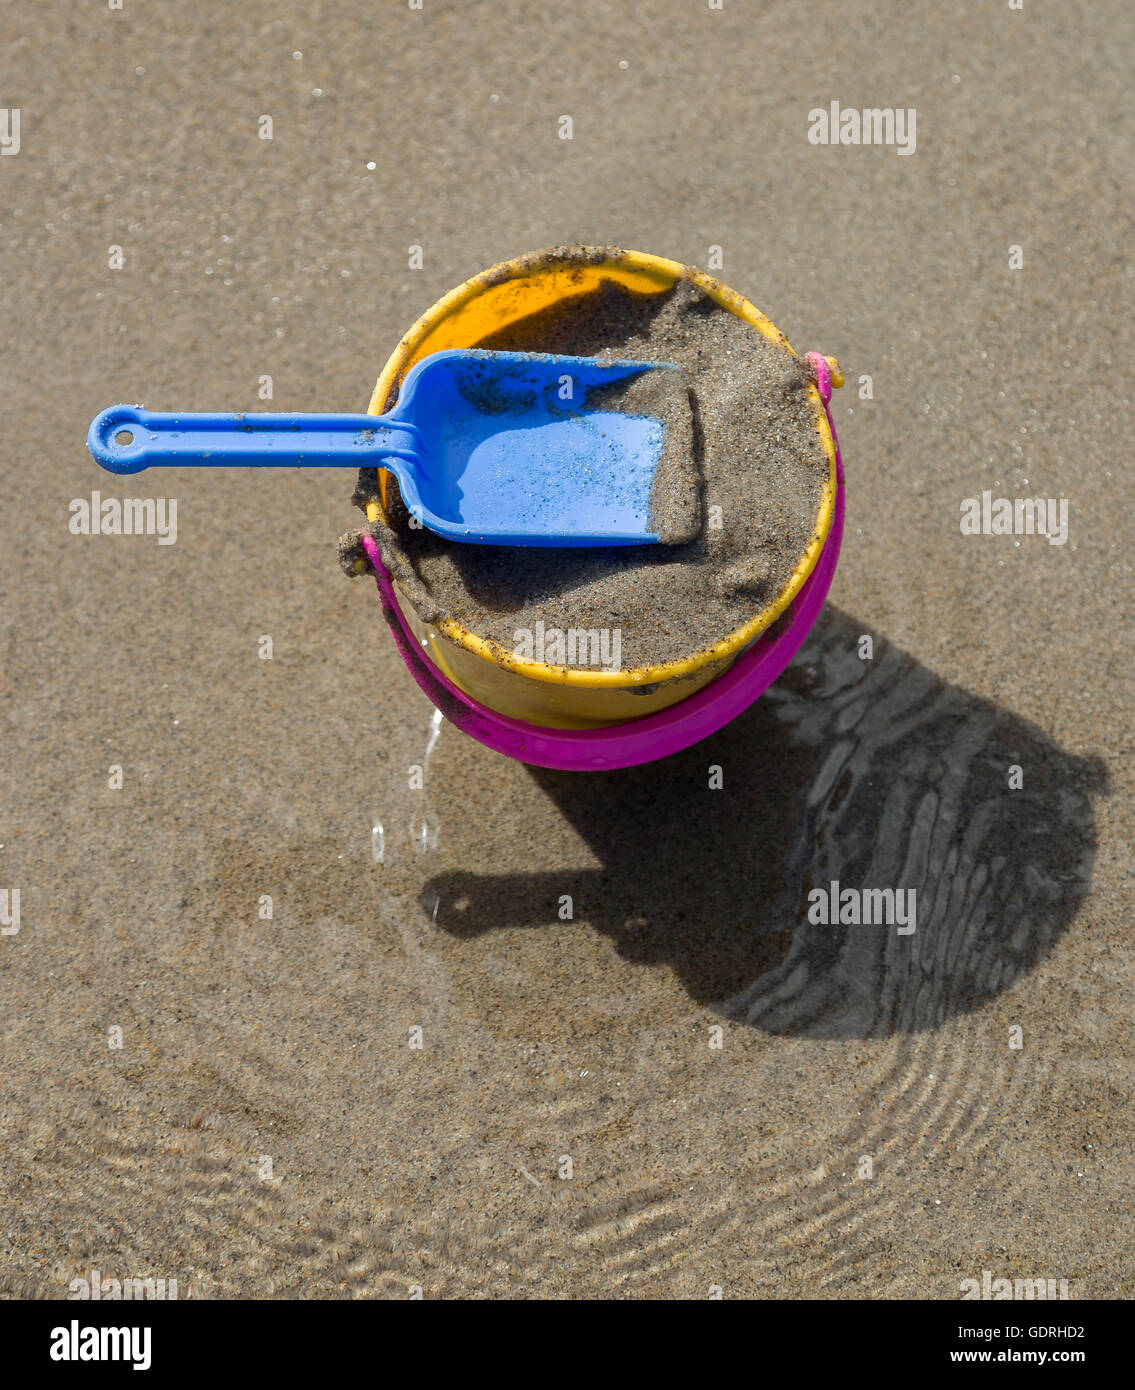 Toy Spade and Bucket on a Beach with sand. Stock Photo